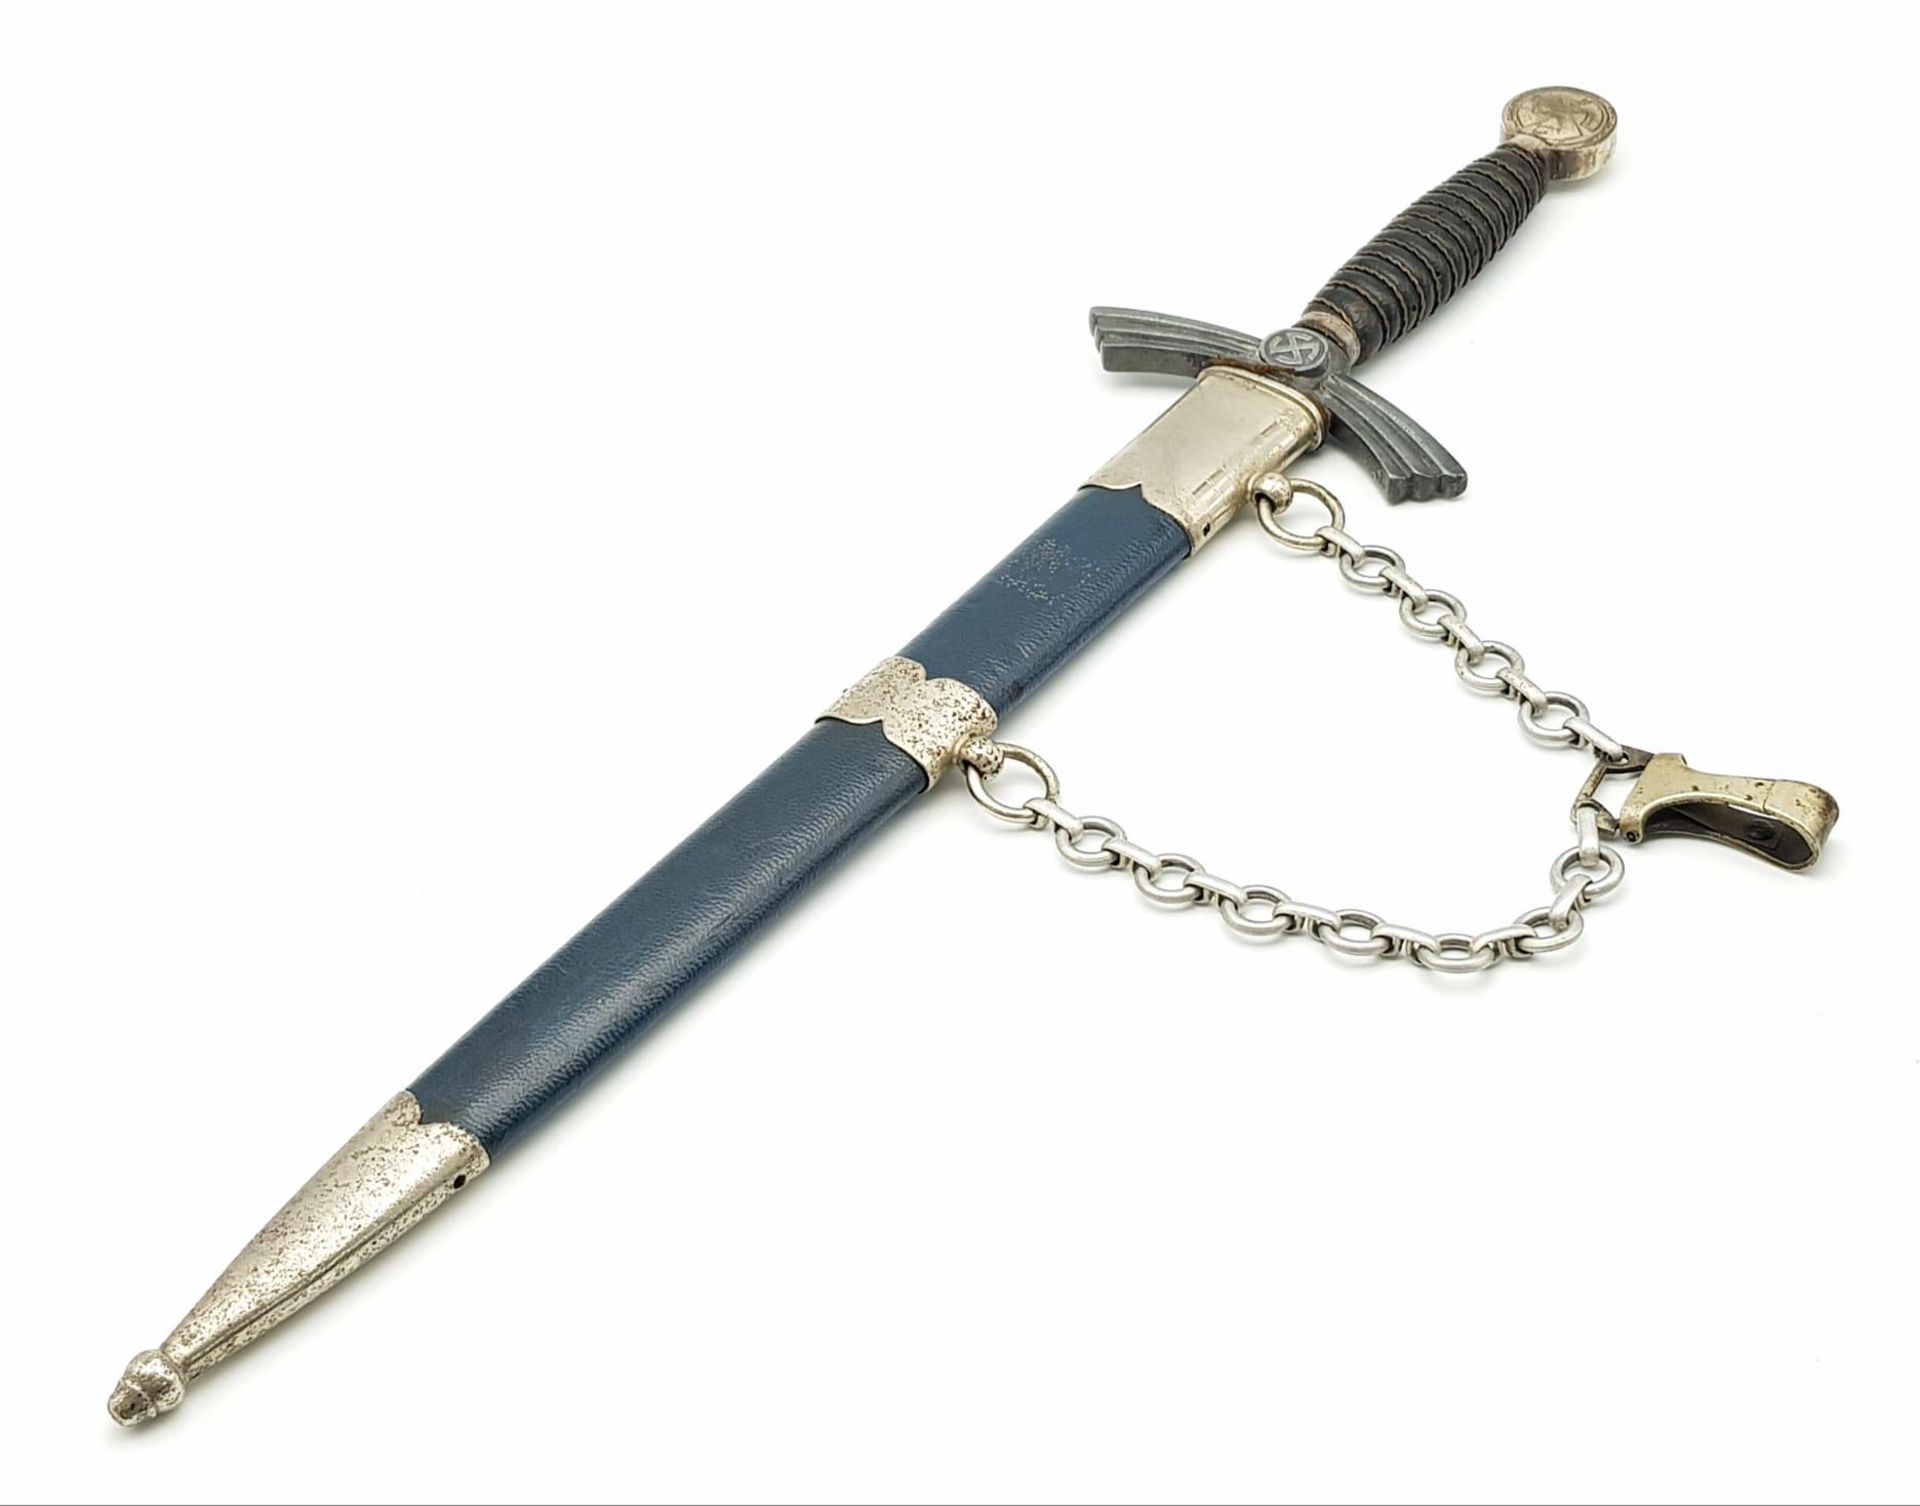 A Blue Luftwaffe Dagger - 1st Model by FW Holler. The mounts and hilt are solid nickel. The sun- - Bild 7 aus 7